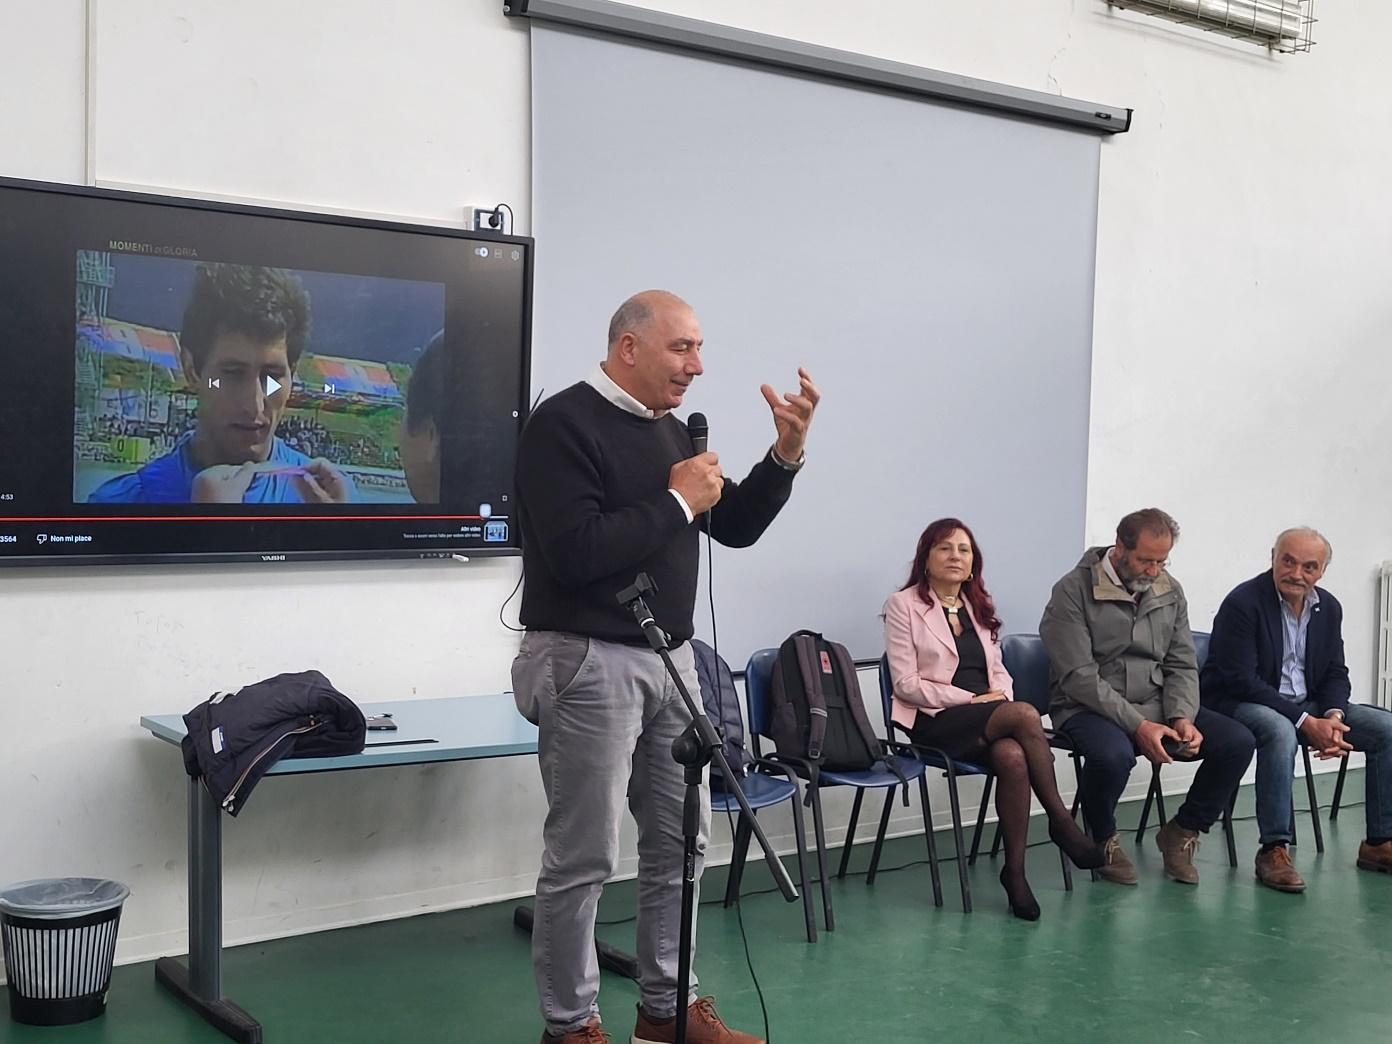 The speech by the President of the Italian Rowing Federation, Giuseppe Abbagnale, winner of two Olympic titles (1984-1988) and seven world titles in rowing